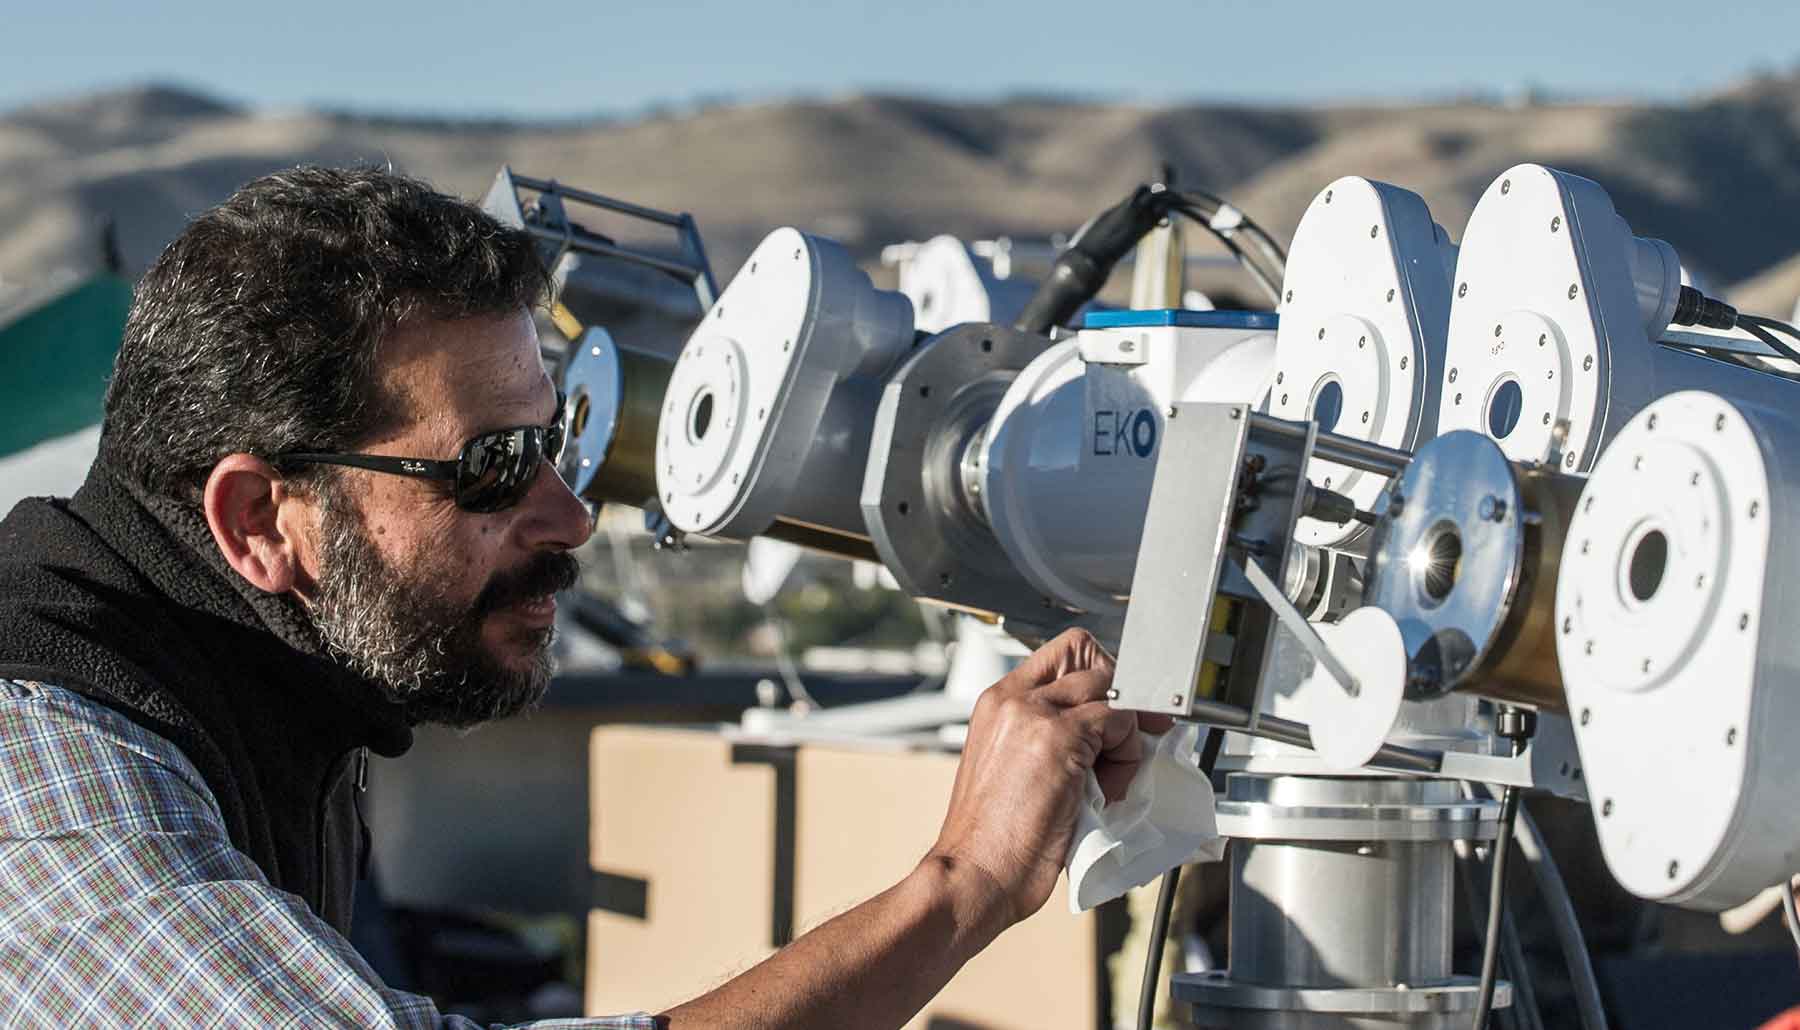 A man works with solar radiation instruments outdoors.